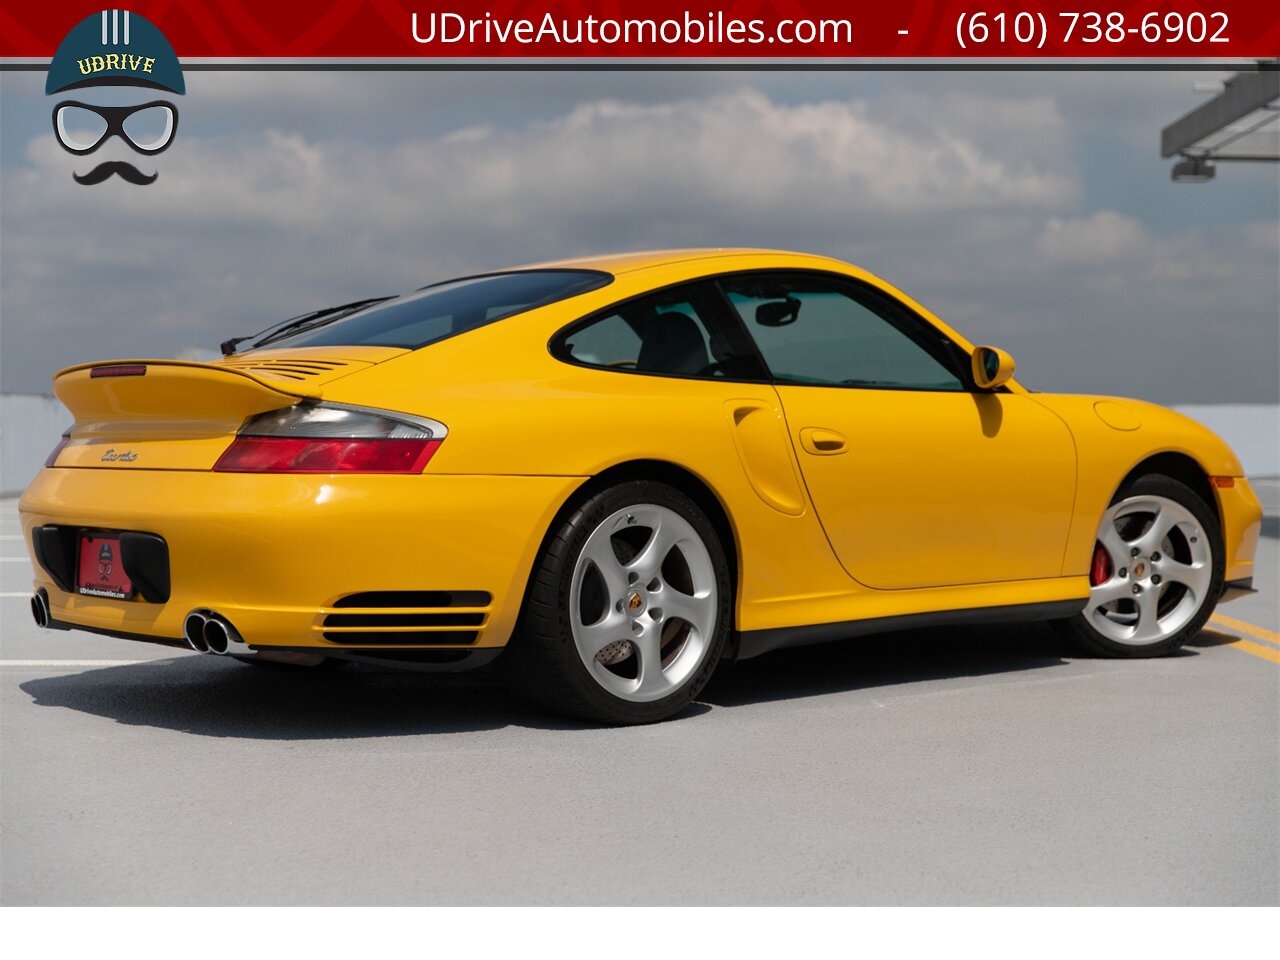 2003 Porsche 911 996 Turbo X50 6Sp Nephrite Green Lthr 9k Miles  Deviating Yellow Stitching Collector Grade BACK AGAIN - Photo 3 - West Chester, PA 19382